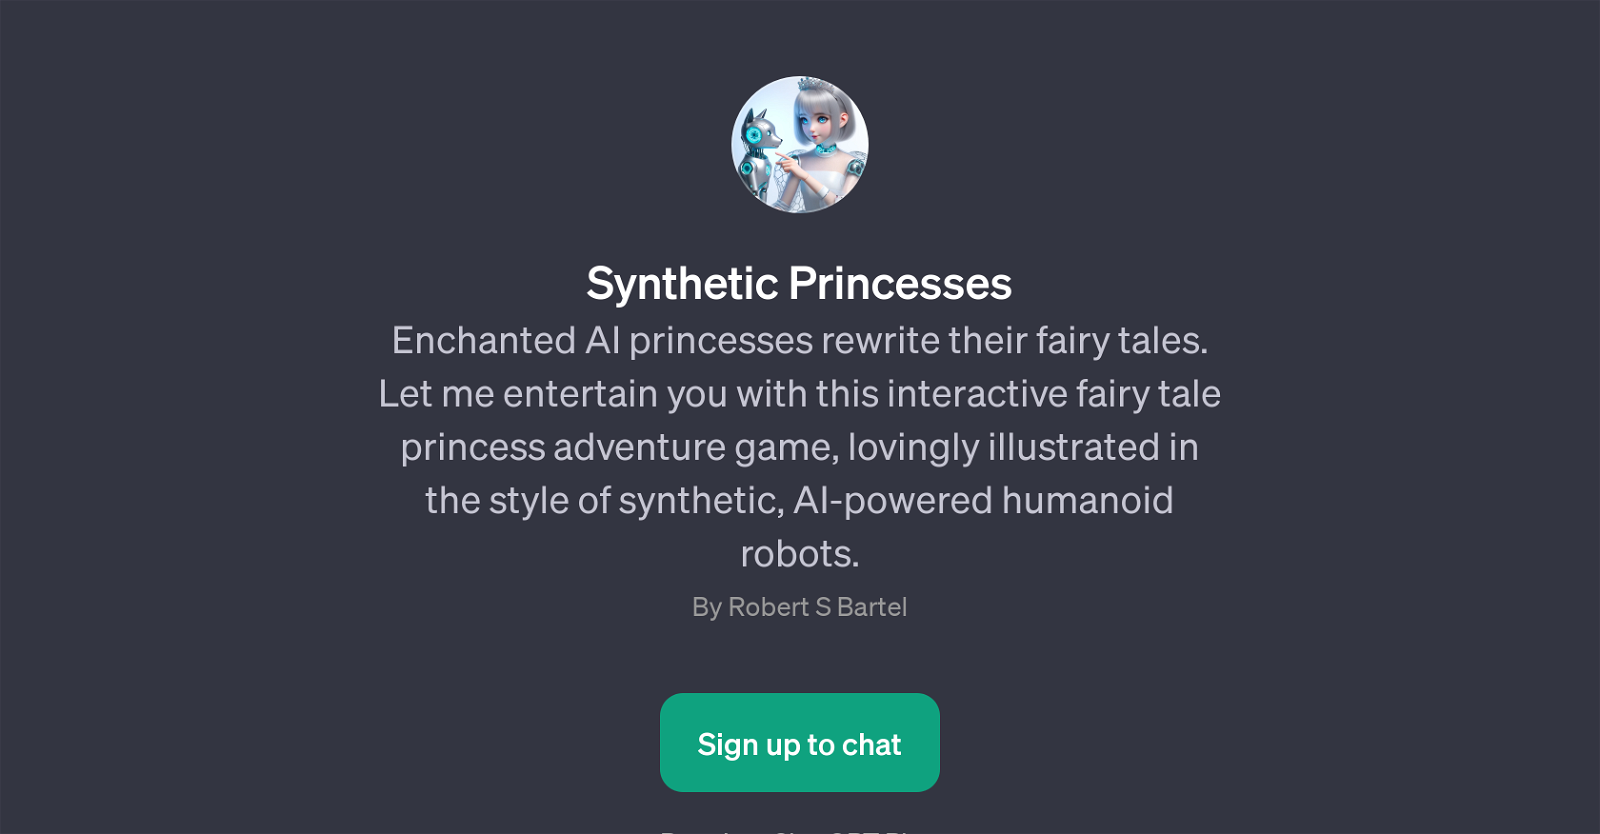 Synthetic Princesses website